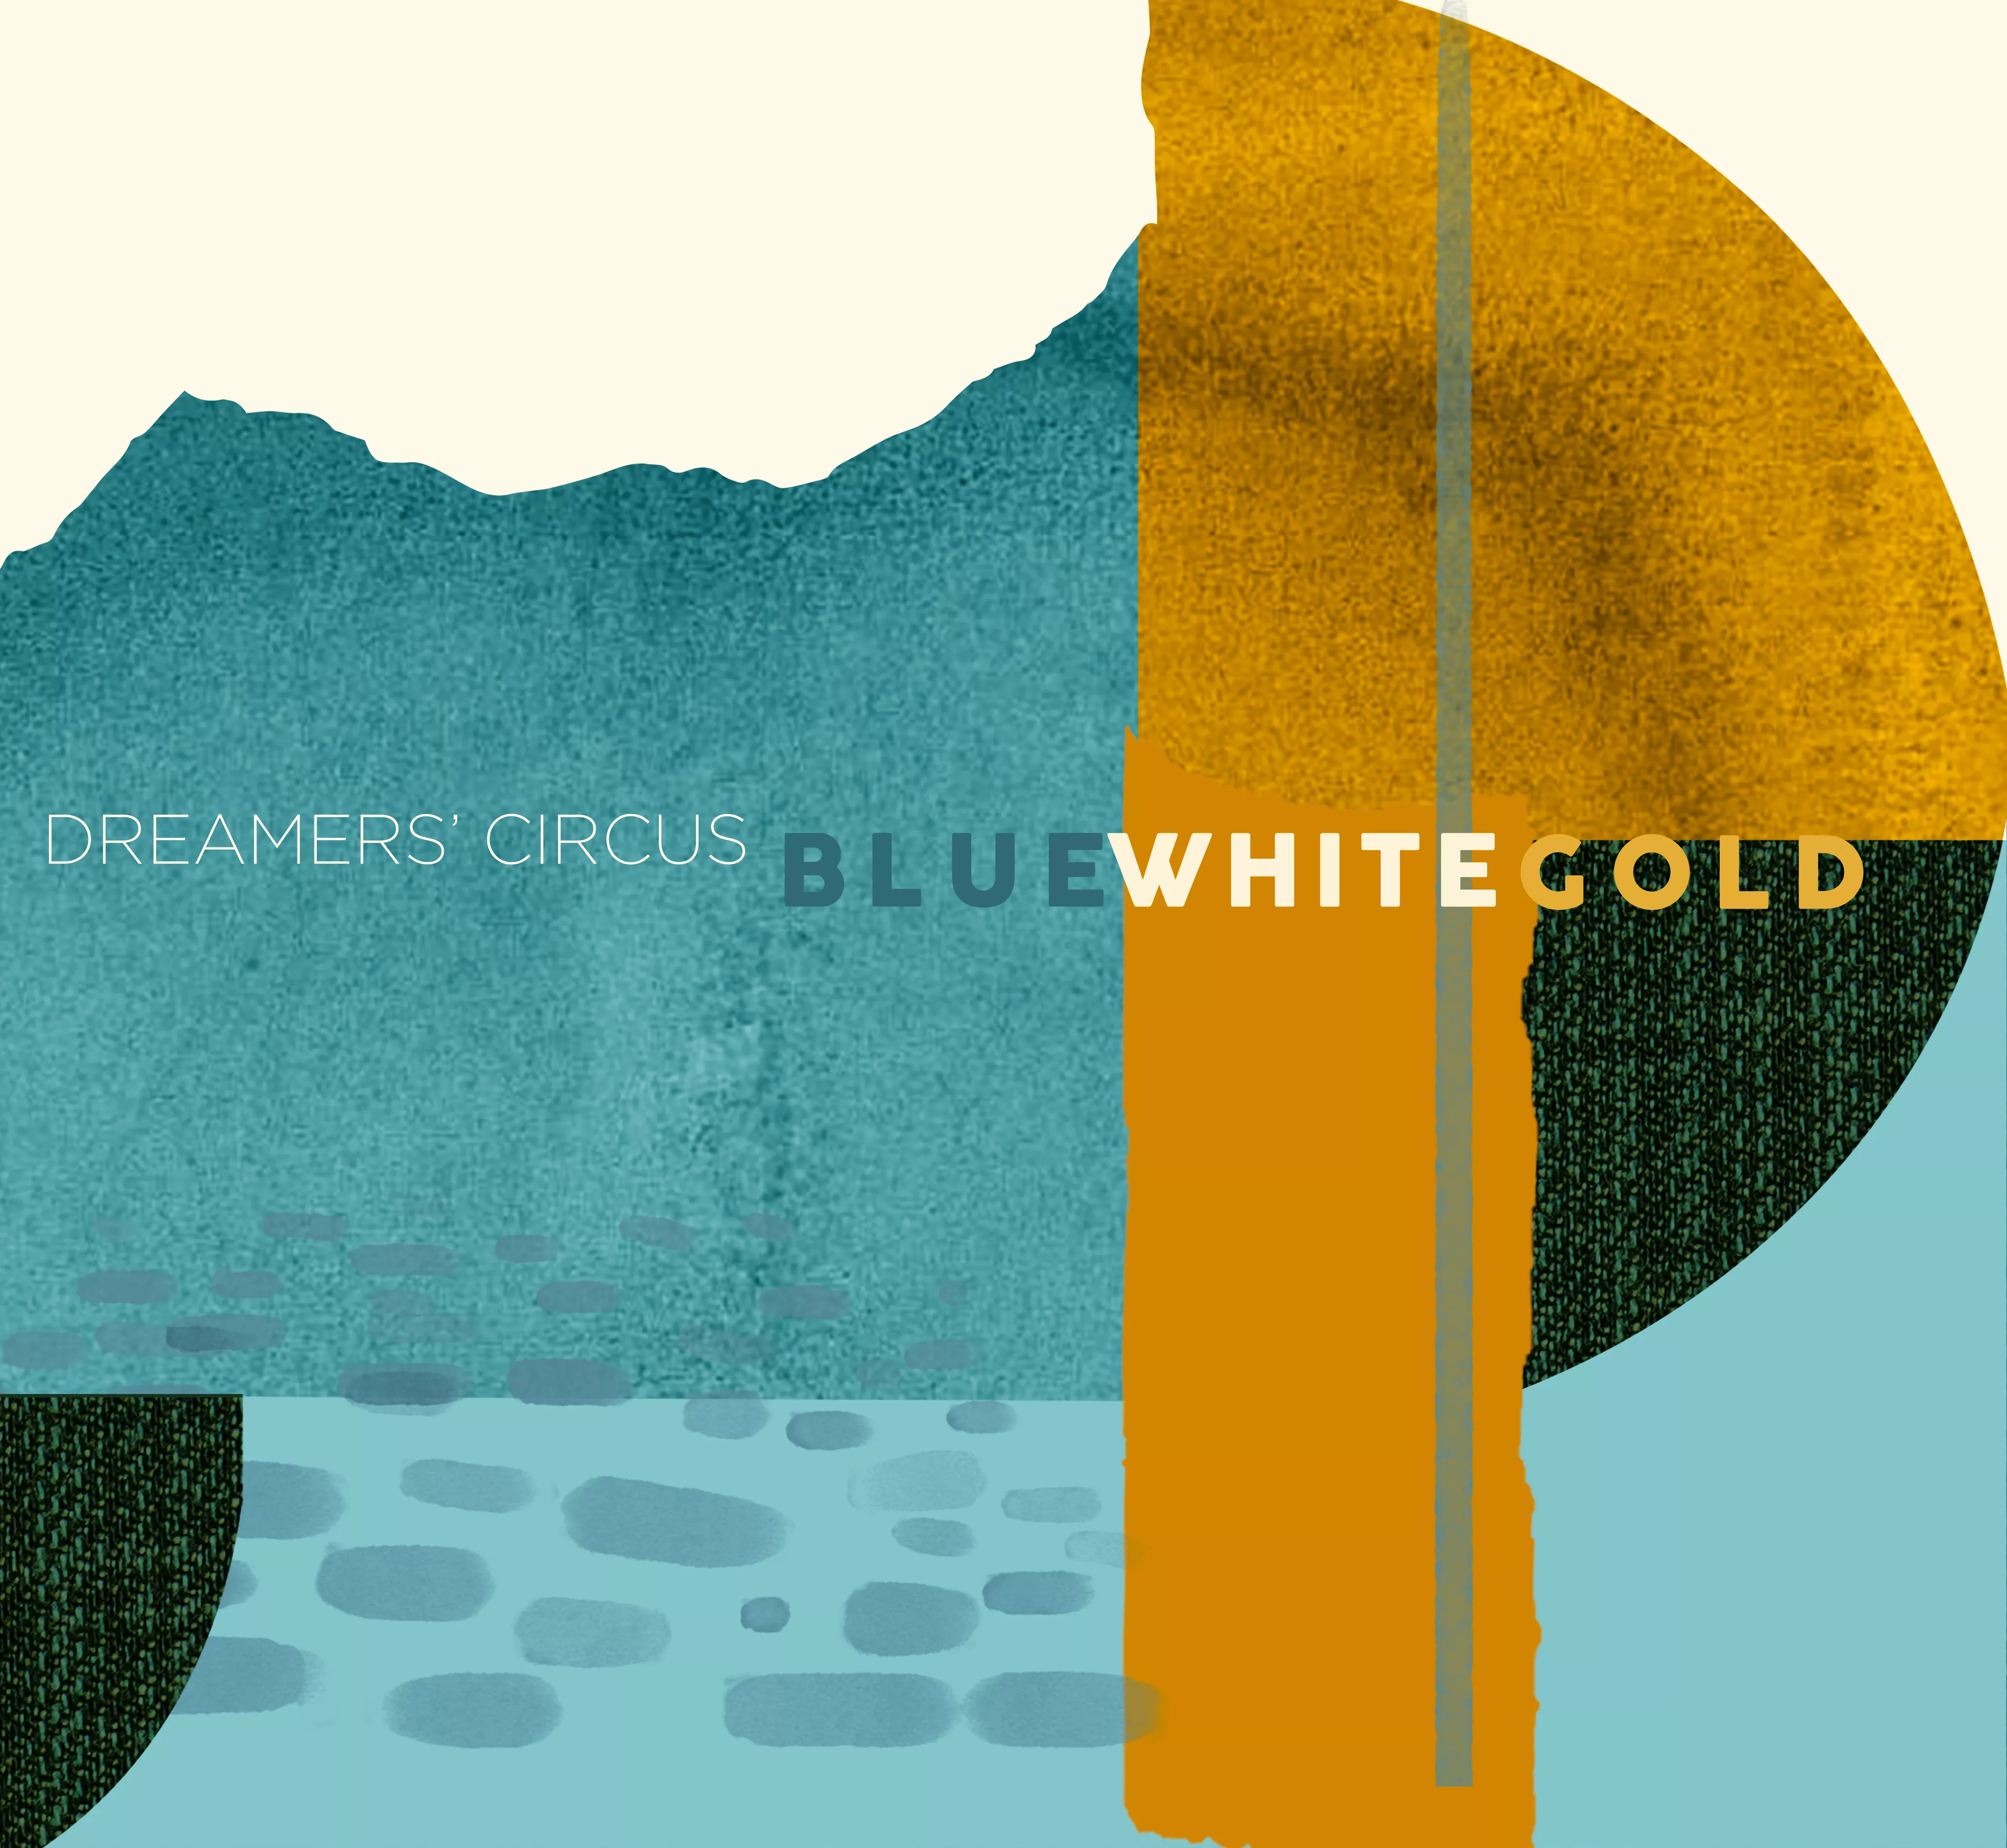 Blue White Gold - Dreamers' Circus